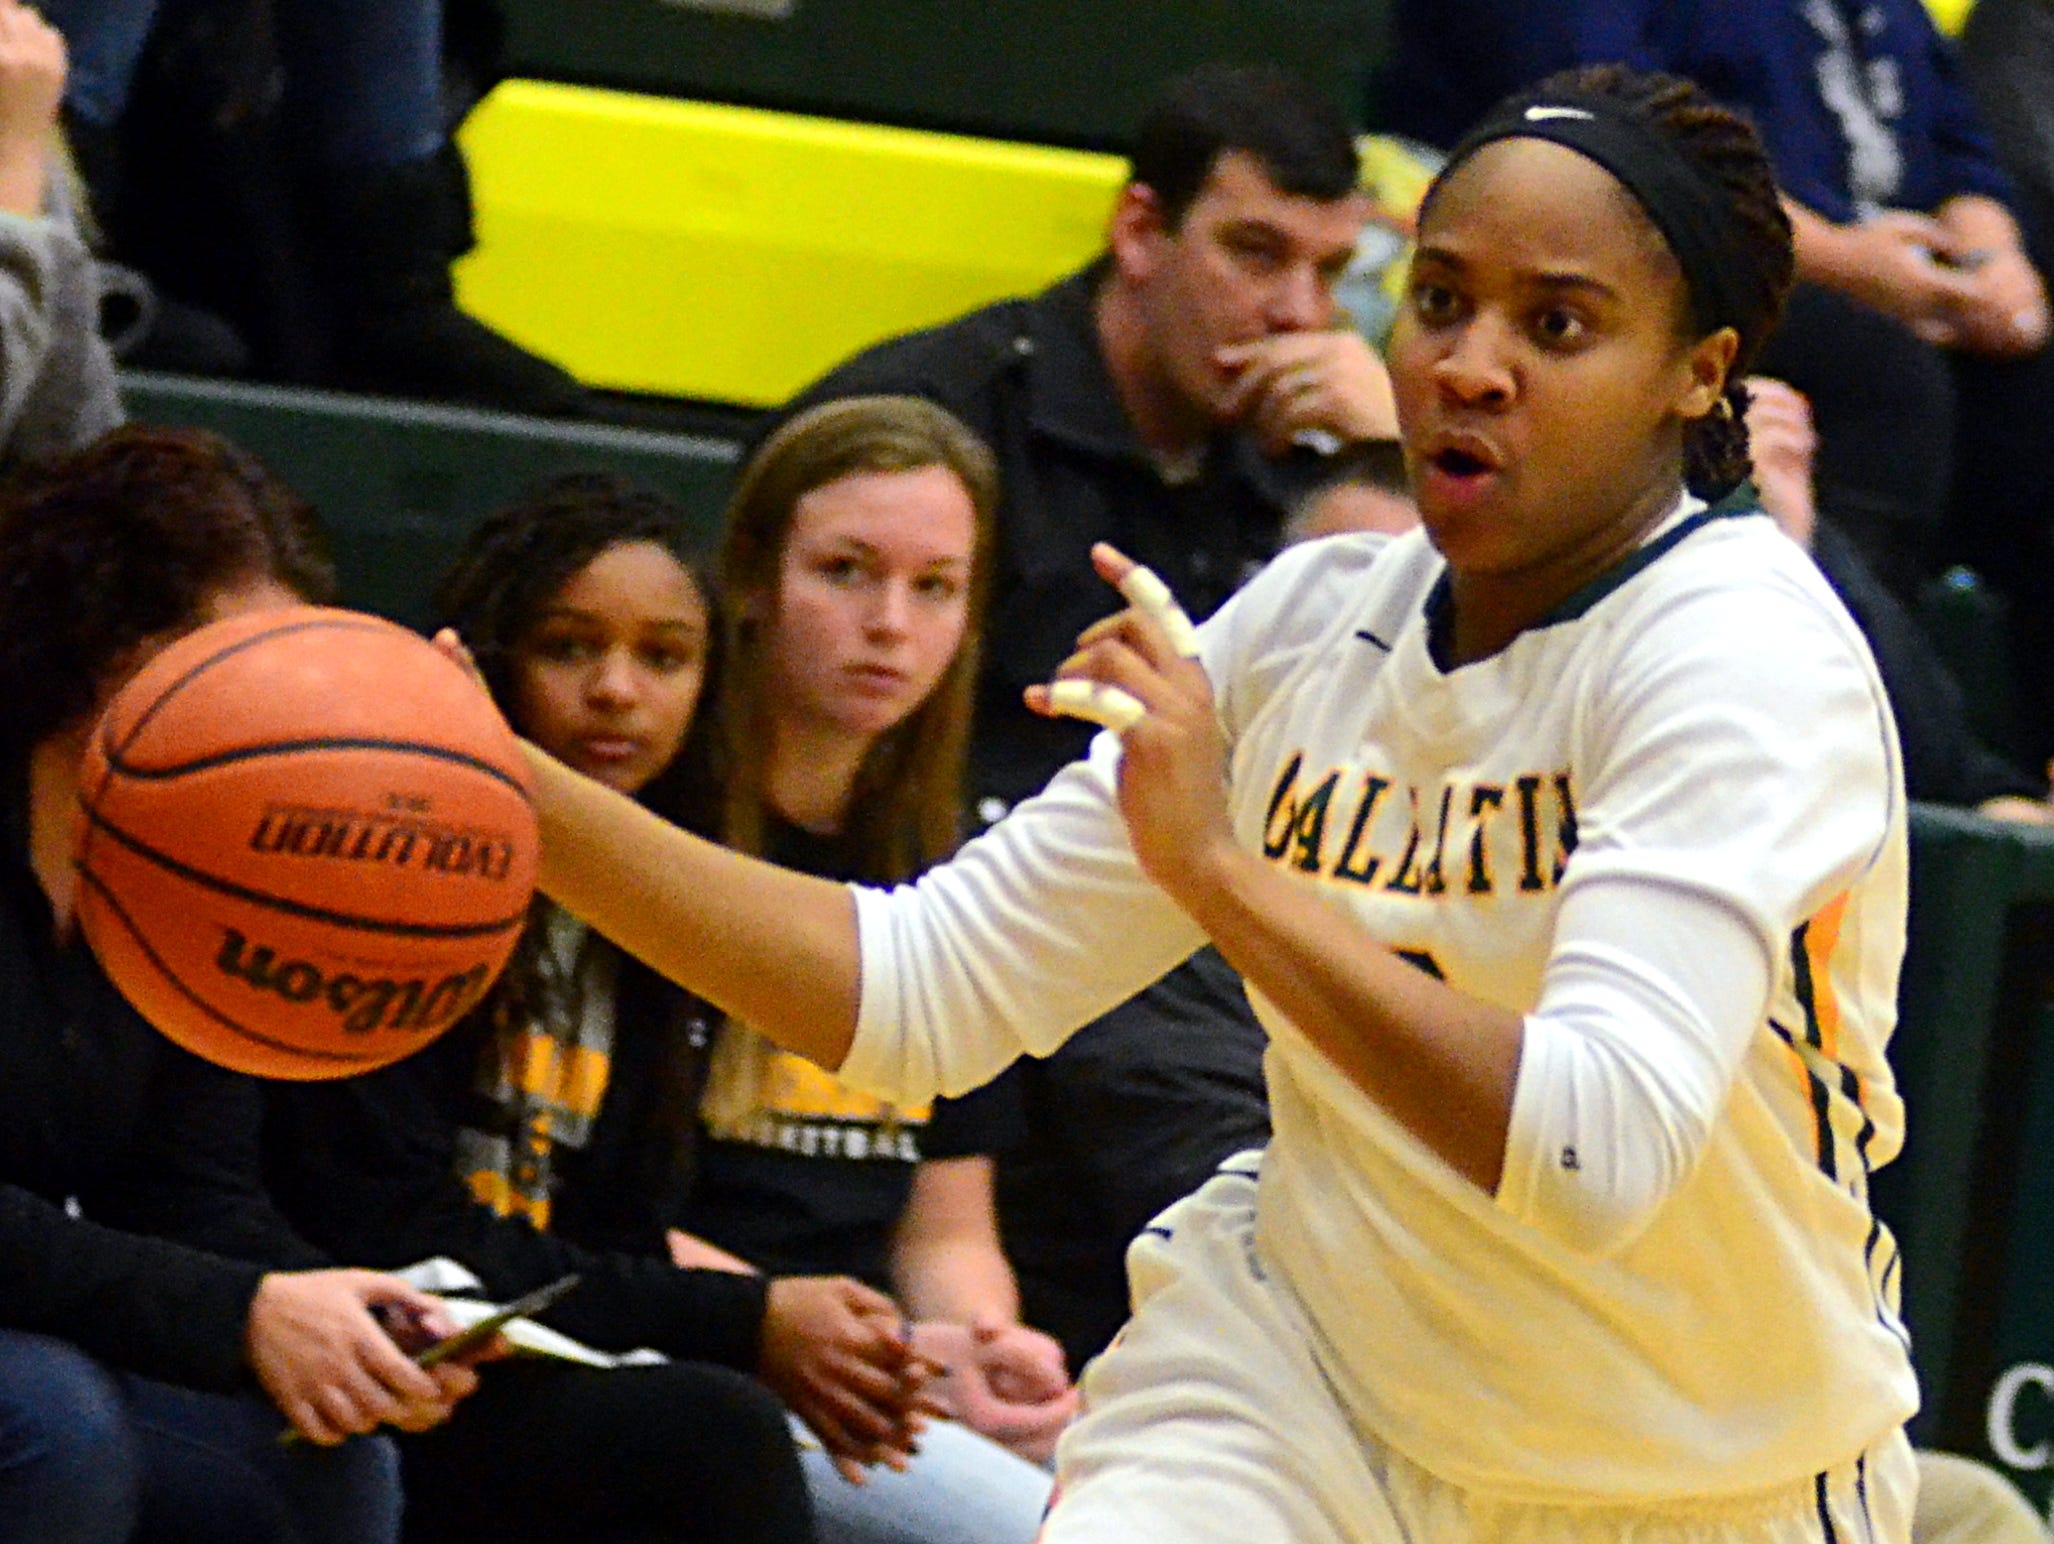 Gallatin High senior point guard Rene Hudson dribbles to the basket during first-quarter action. Hudson scored 27 points in the Lady Wave’s 53-47 loss to Hendersonville on Tuesday evening.